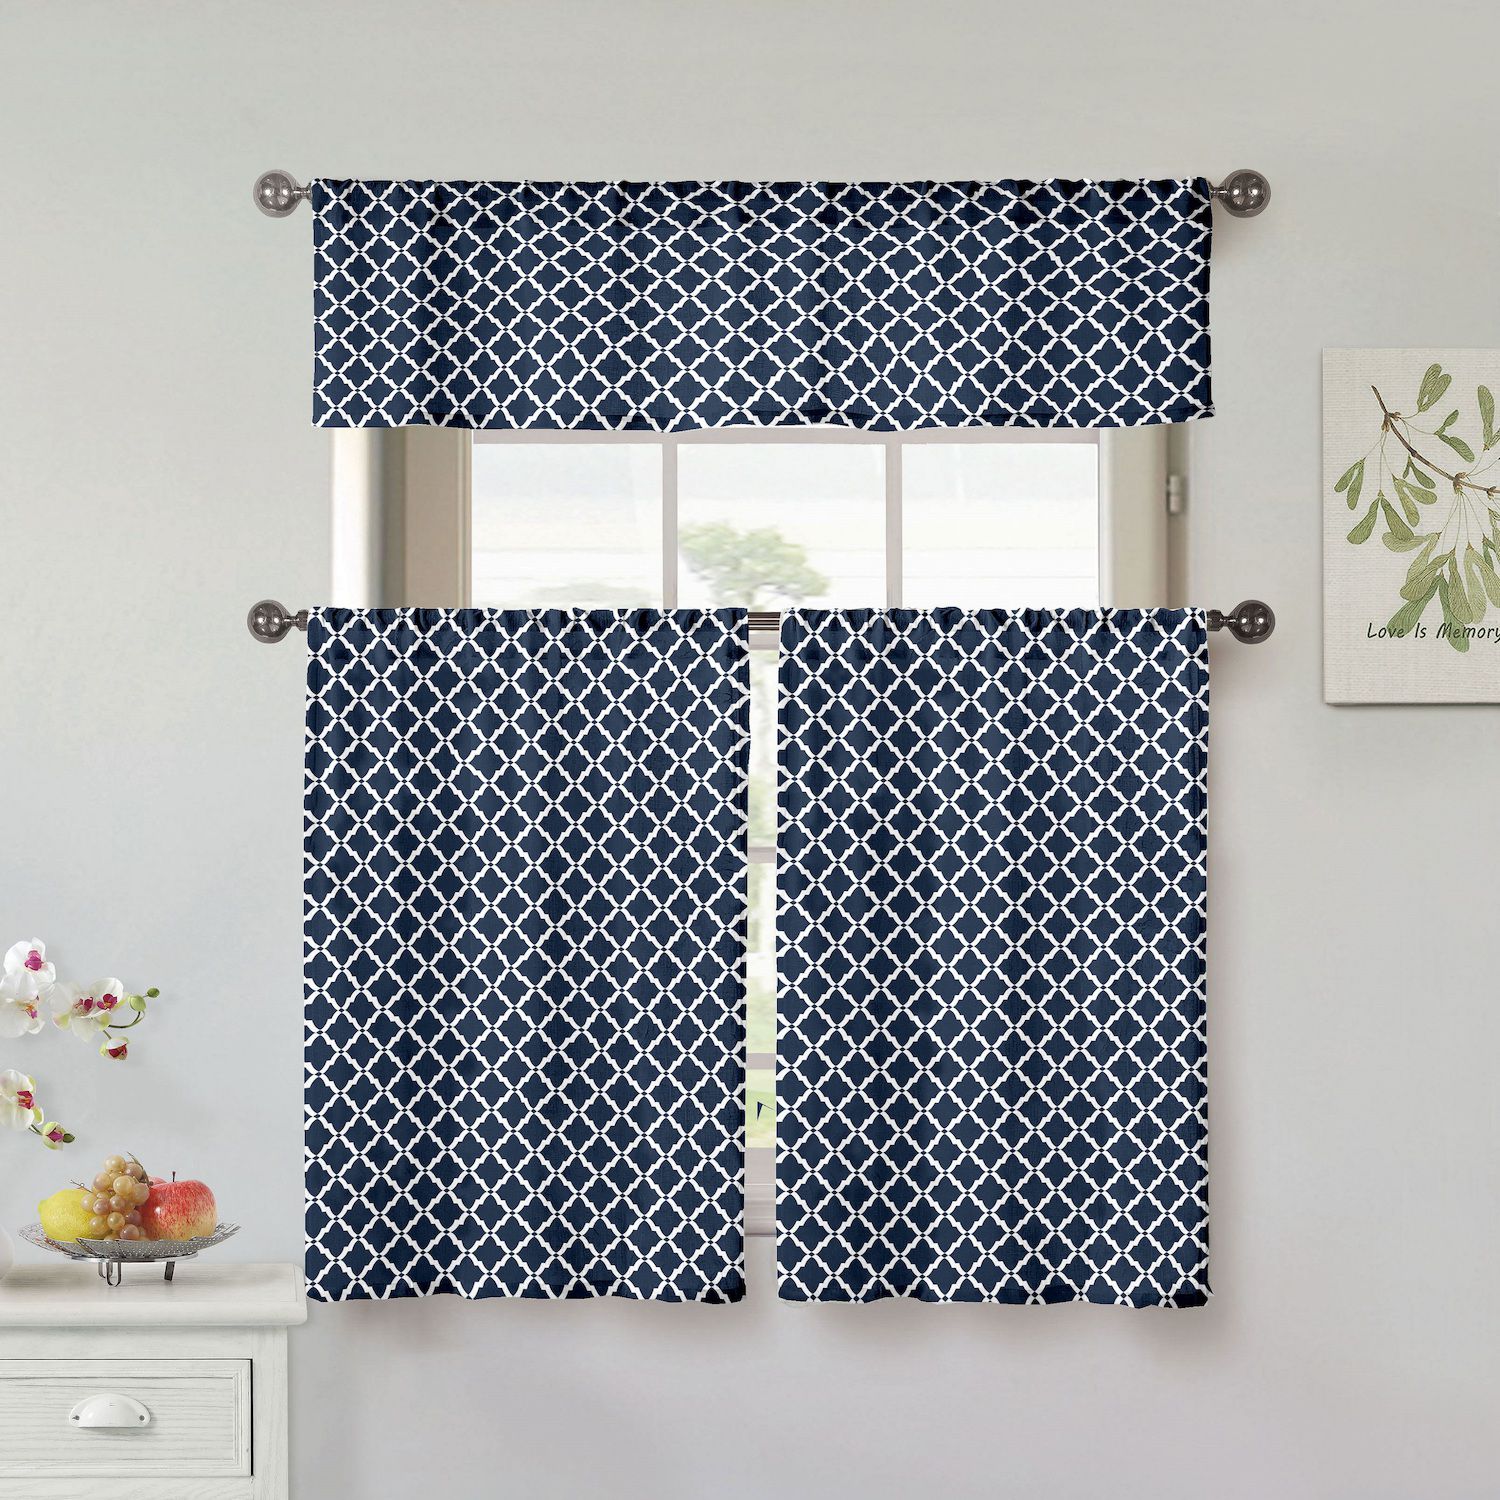 Image for Home Maison Moana Geo 2-pack Window Curtain Set at Kohl's.